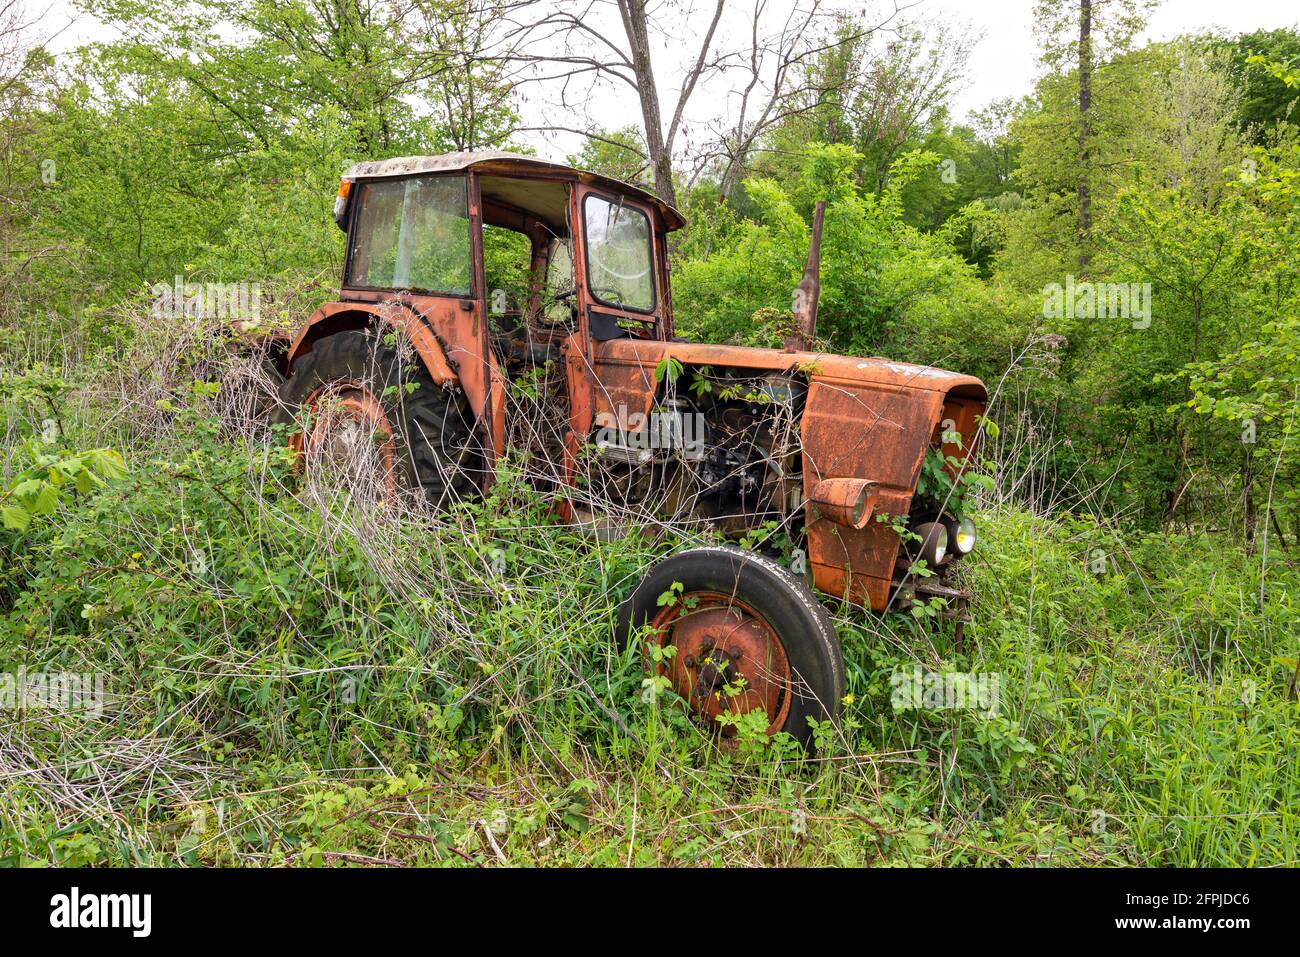 Old rusty vintage abandoned tractor in a field overgrown with tall grass. Stock Photo